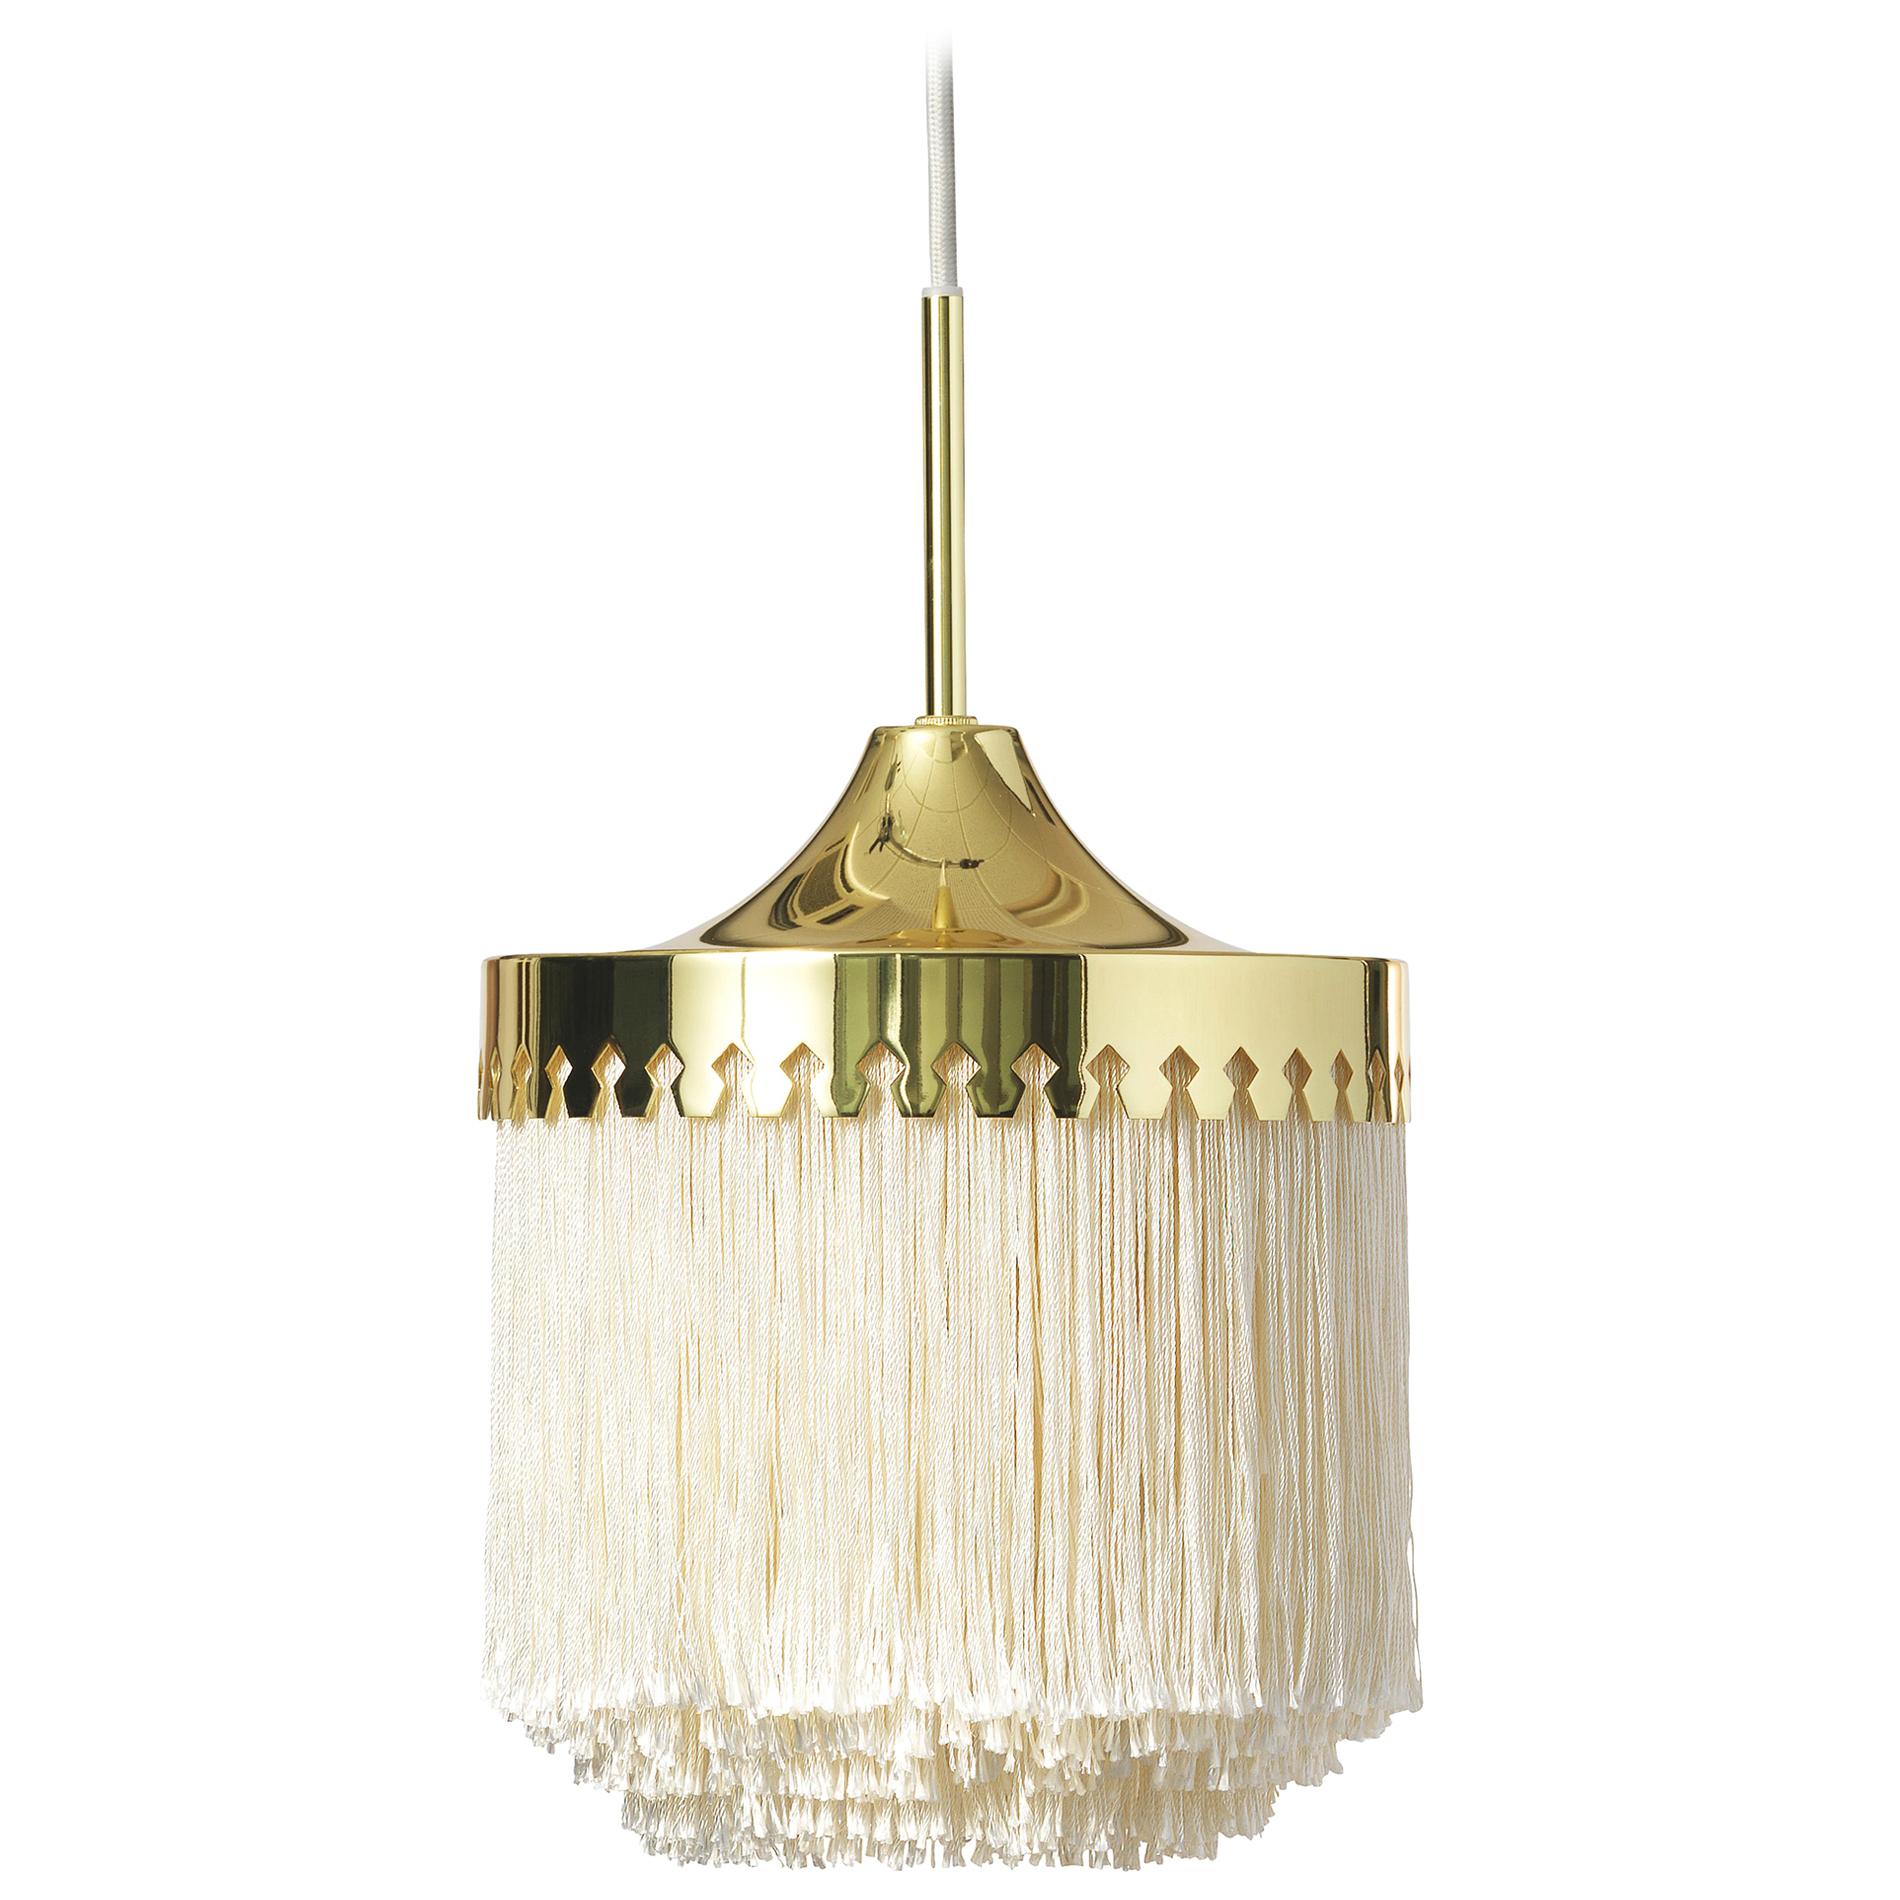 Fringe Small Pendant, by Hans Agne Jakobsson from Warm Nordic